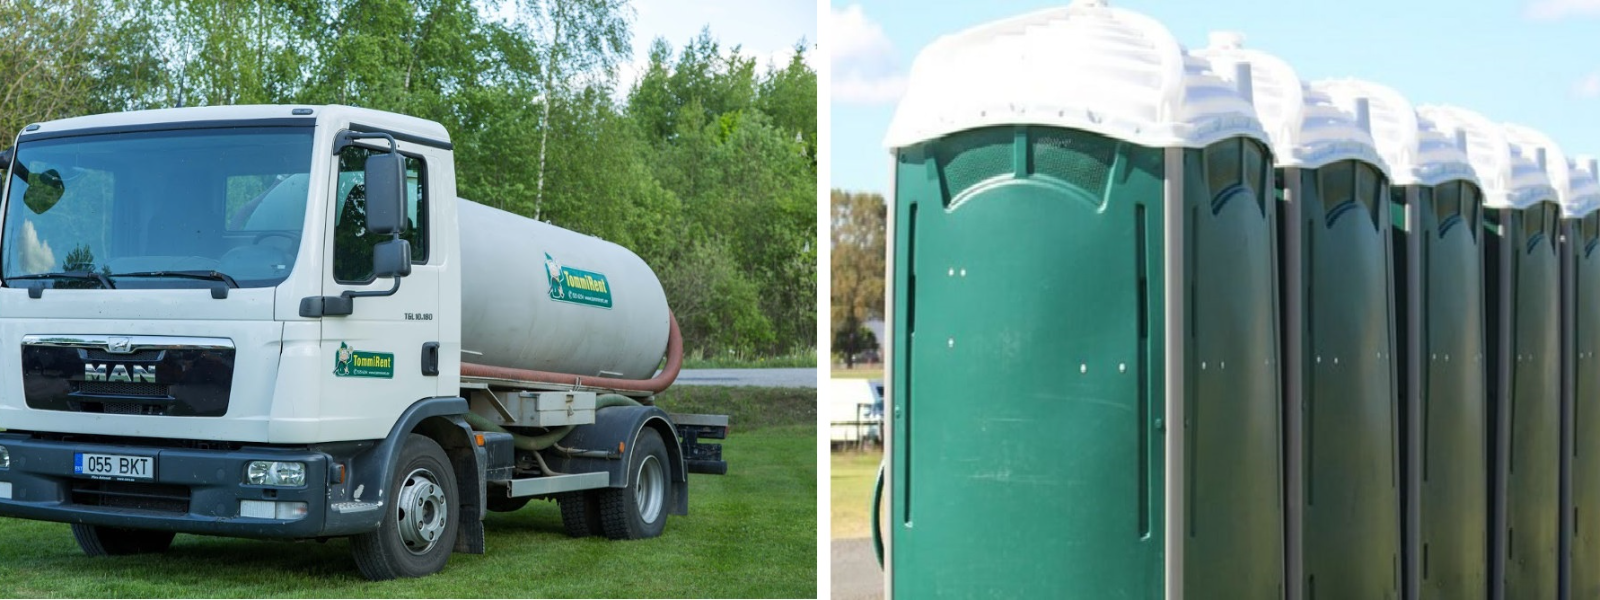 TOMMIRENT OÜ - transport of waste, Waste management, outdoor toilet, Trailer with two outdoor toilets, Sealing the outdoo...